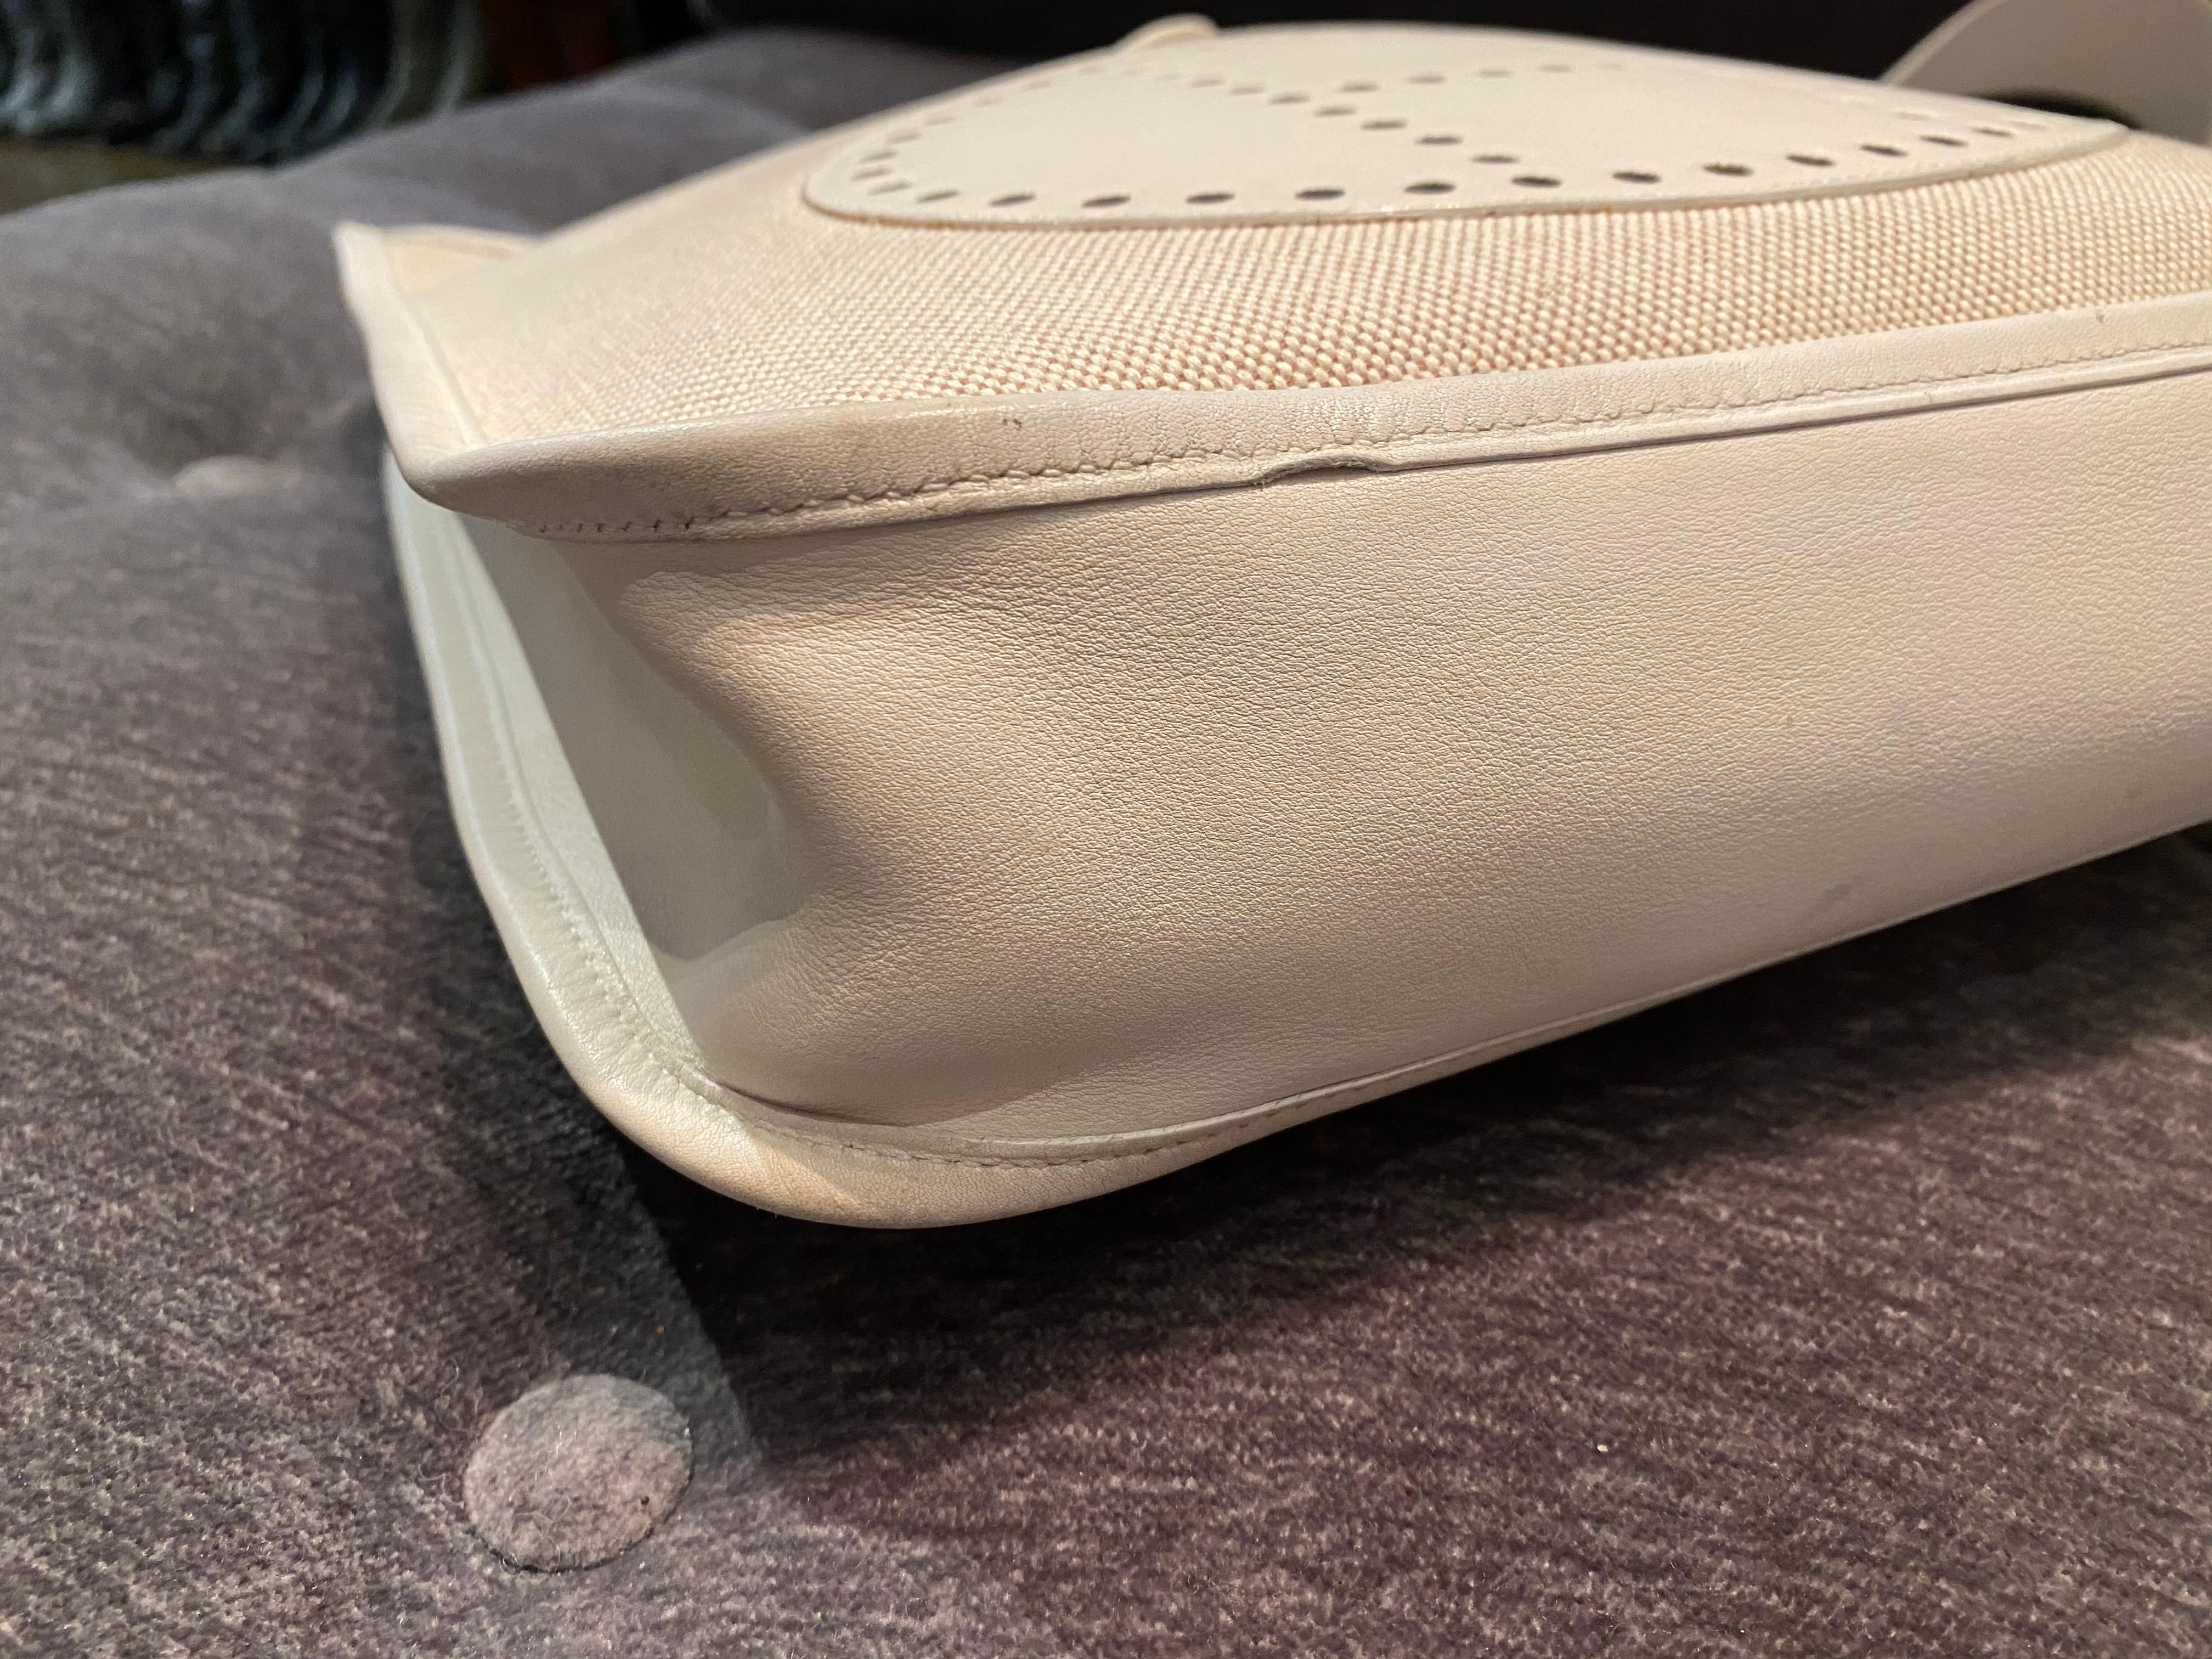 Hermes Evelyne Pm White Leather/Canvas Shoulder Bag In Good Condition For Sale In Roslyn, NY